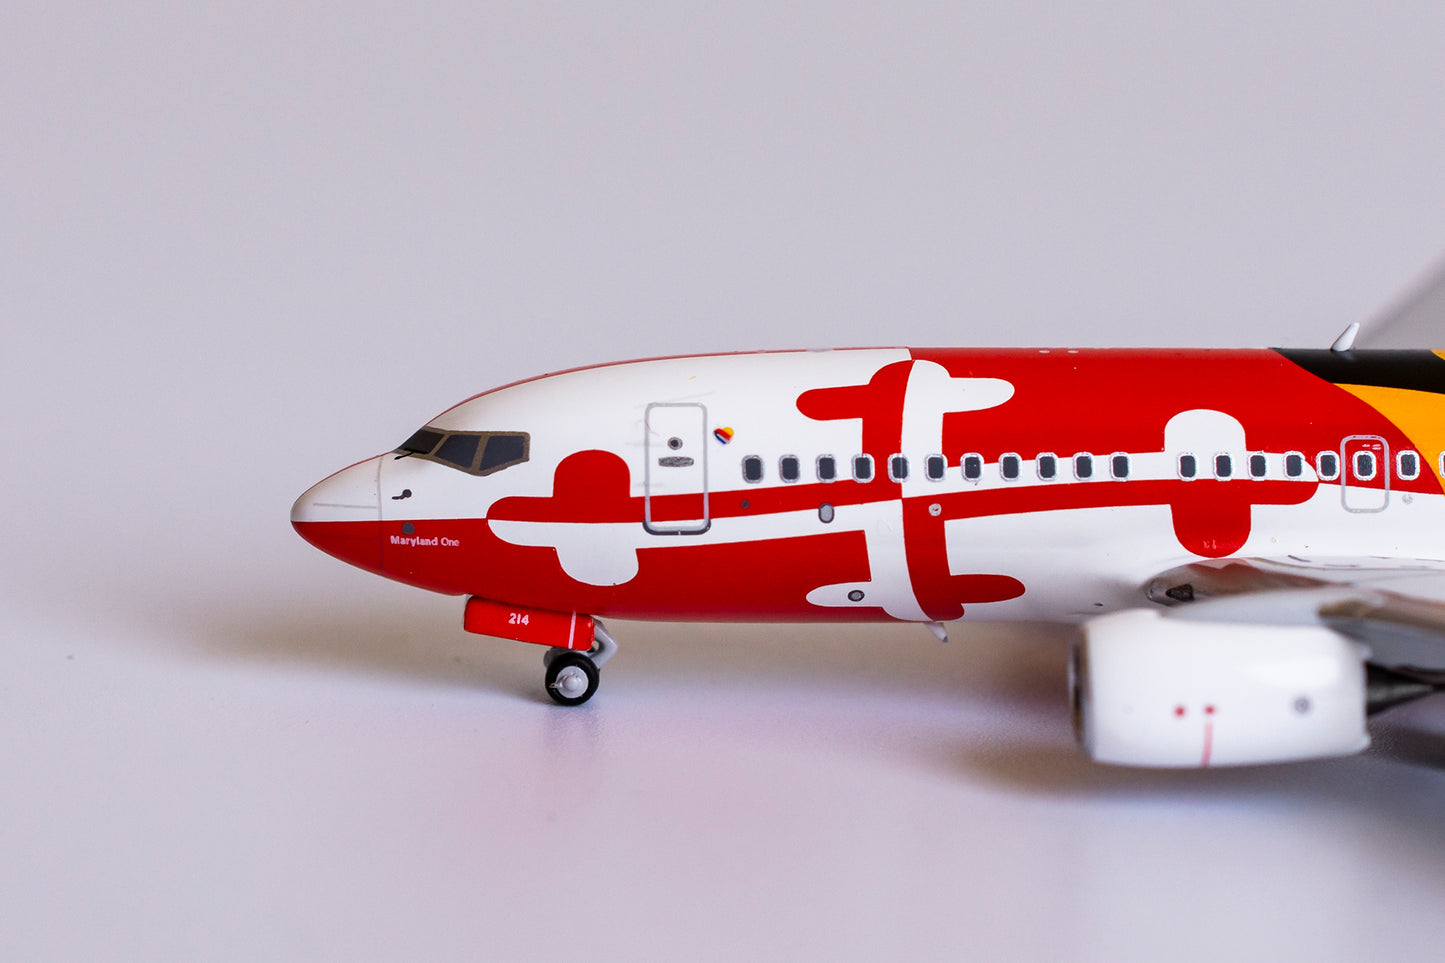 1:400 NG Models Southwest Airlines Boeing 737-700 "Maryland One" N214WN (Heart Tail) NG77007